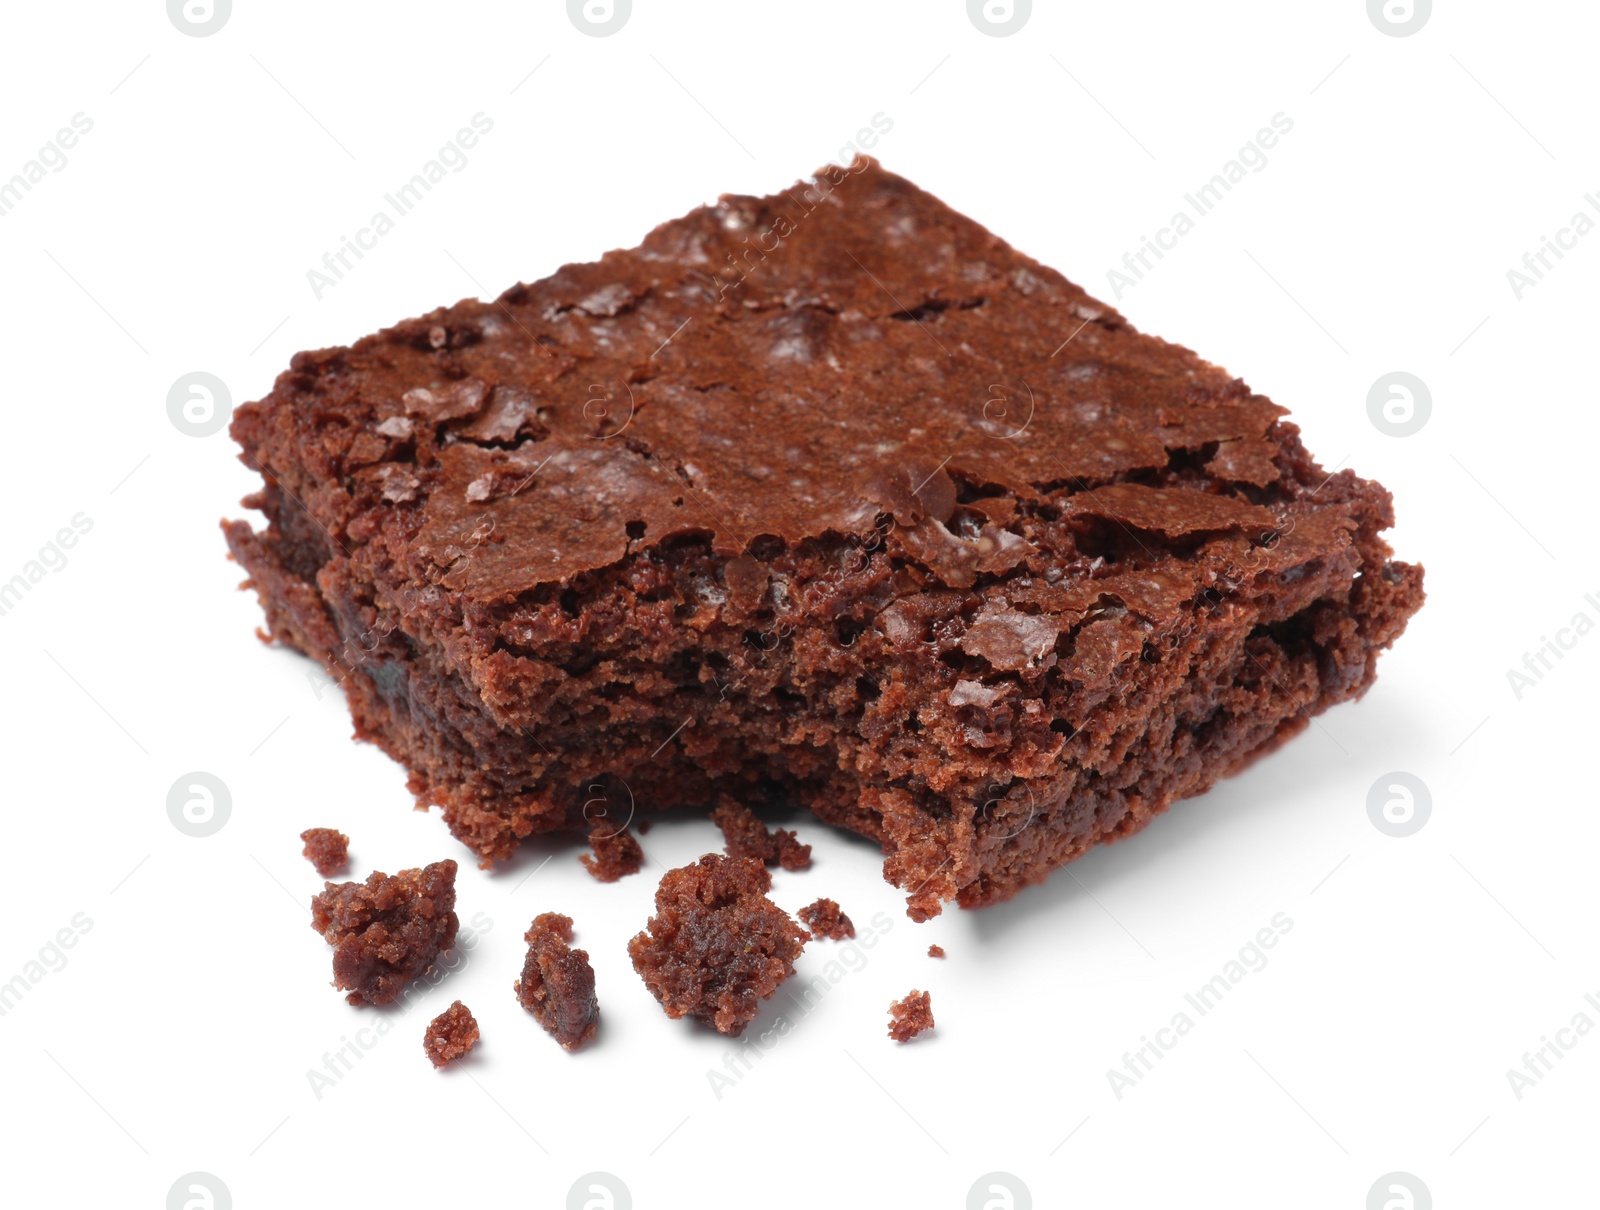 Photo of Bitten delicious chocolate brownie on white background